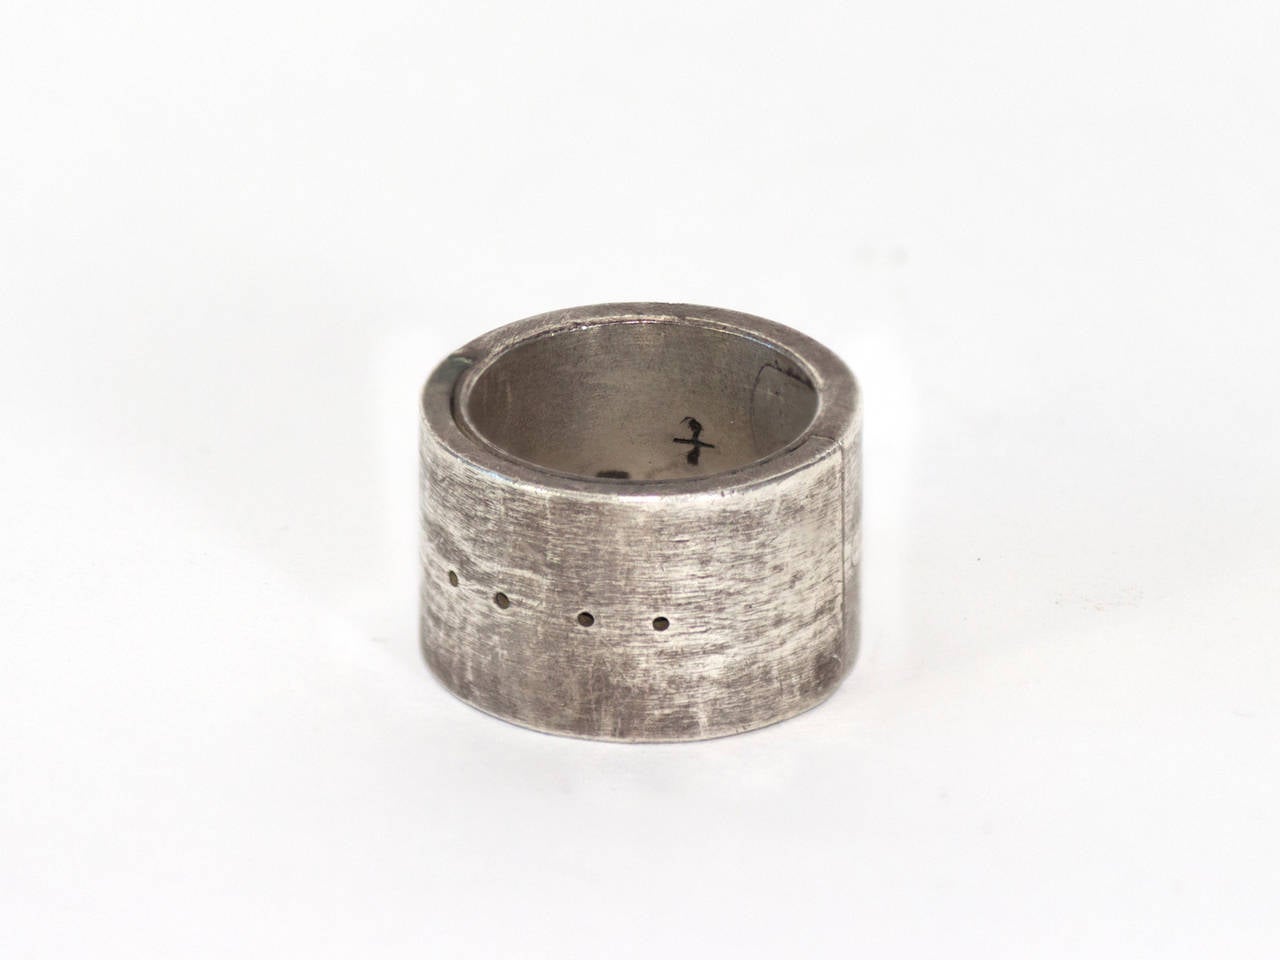 Sistema Ring by P/4 in dirty sterling finish.